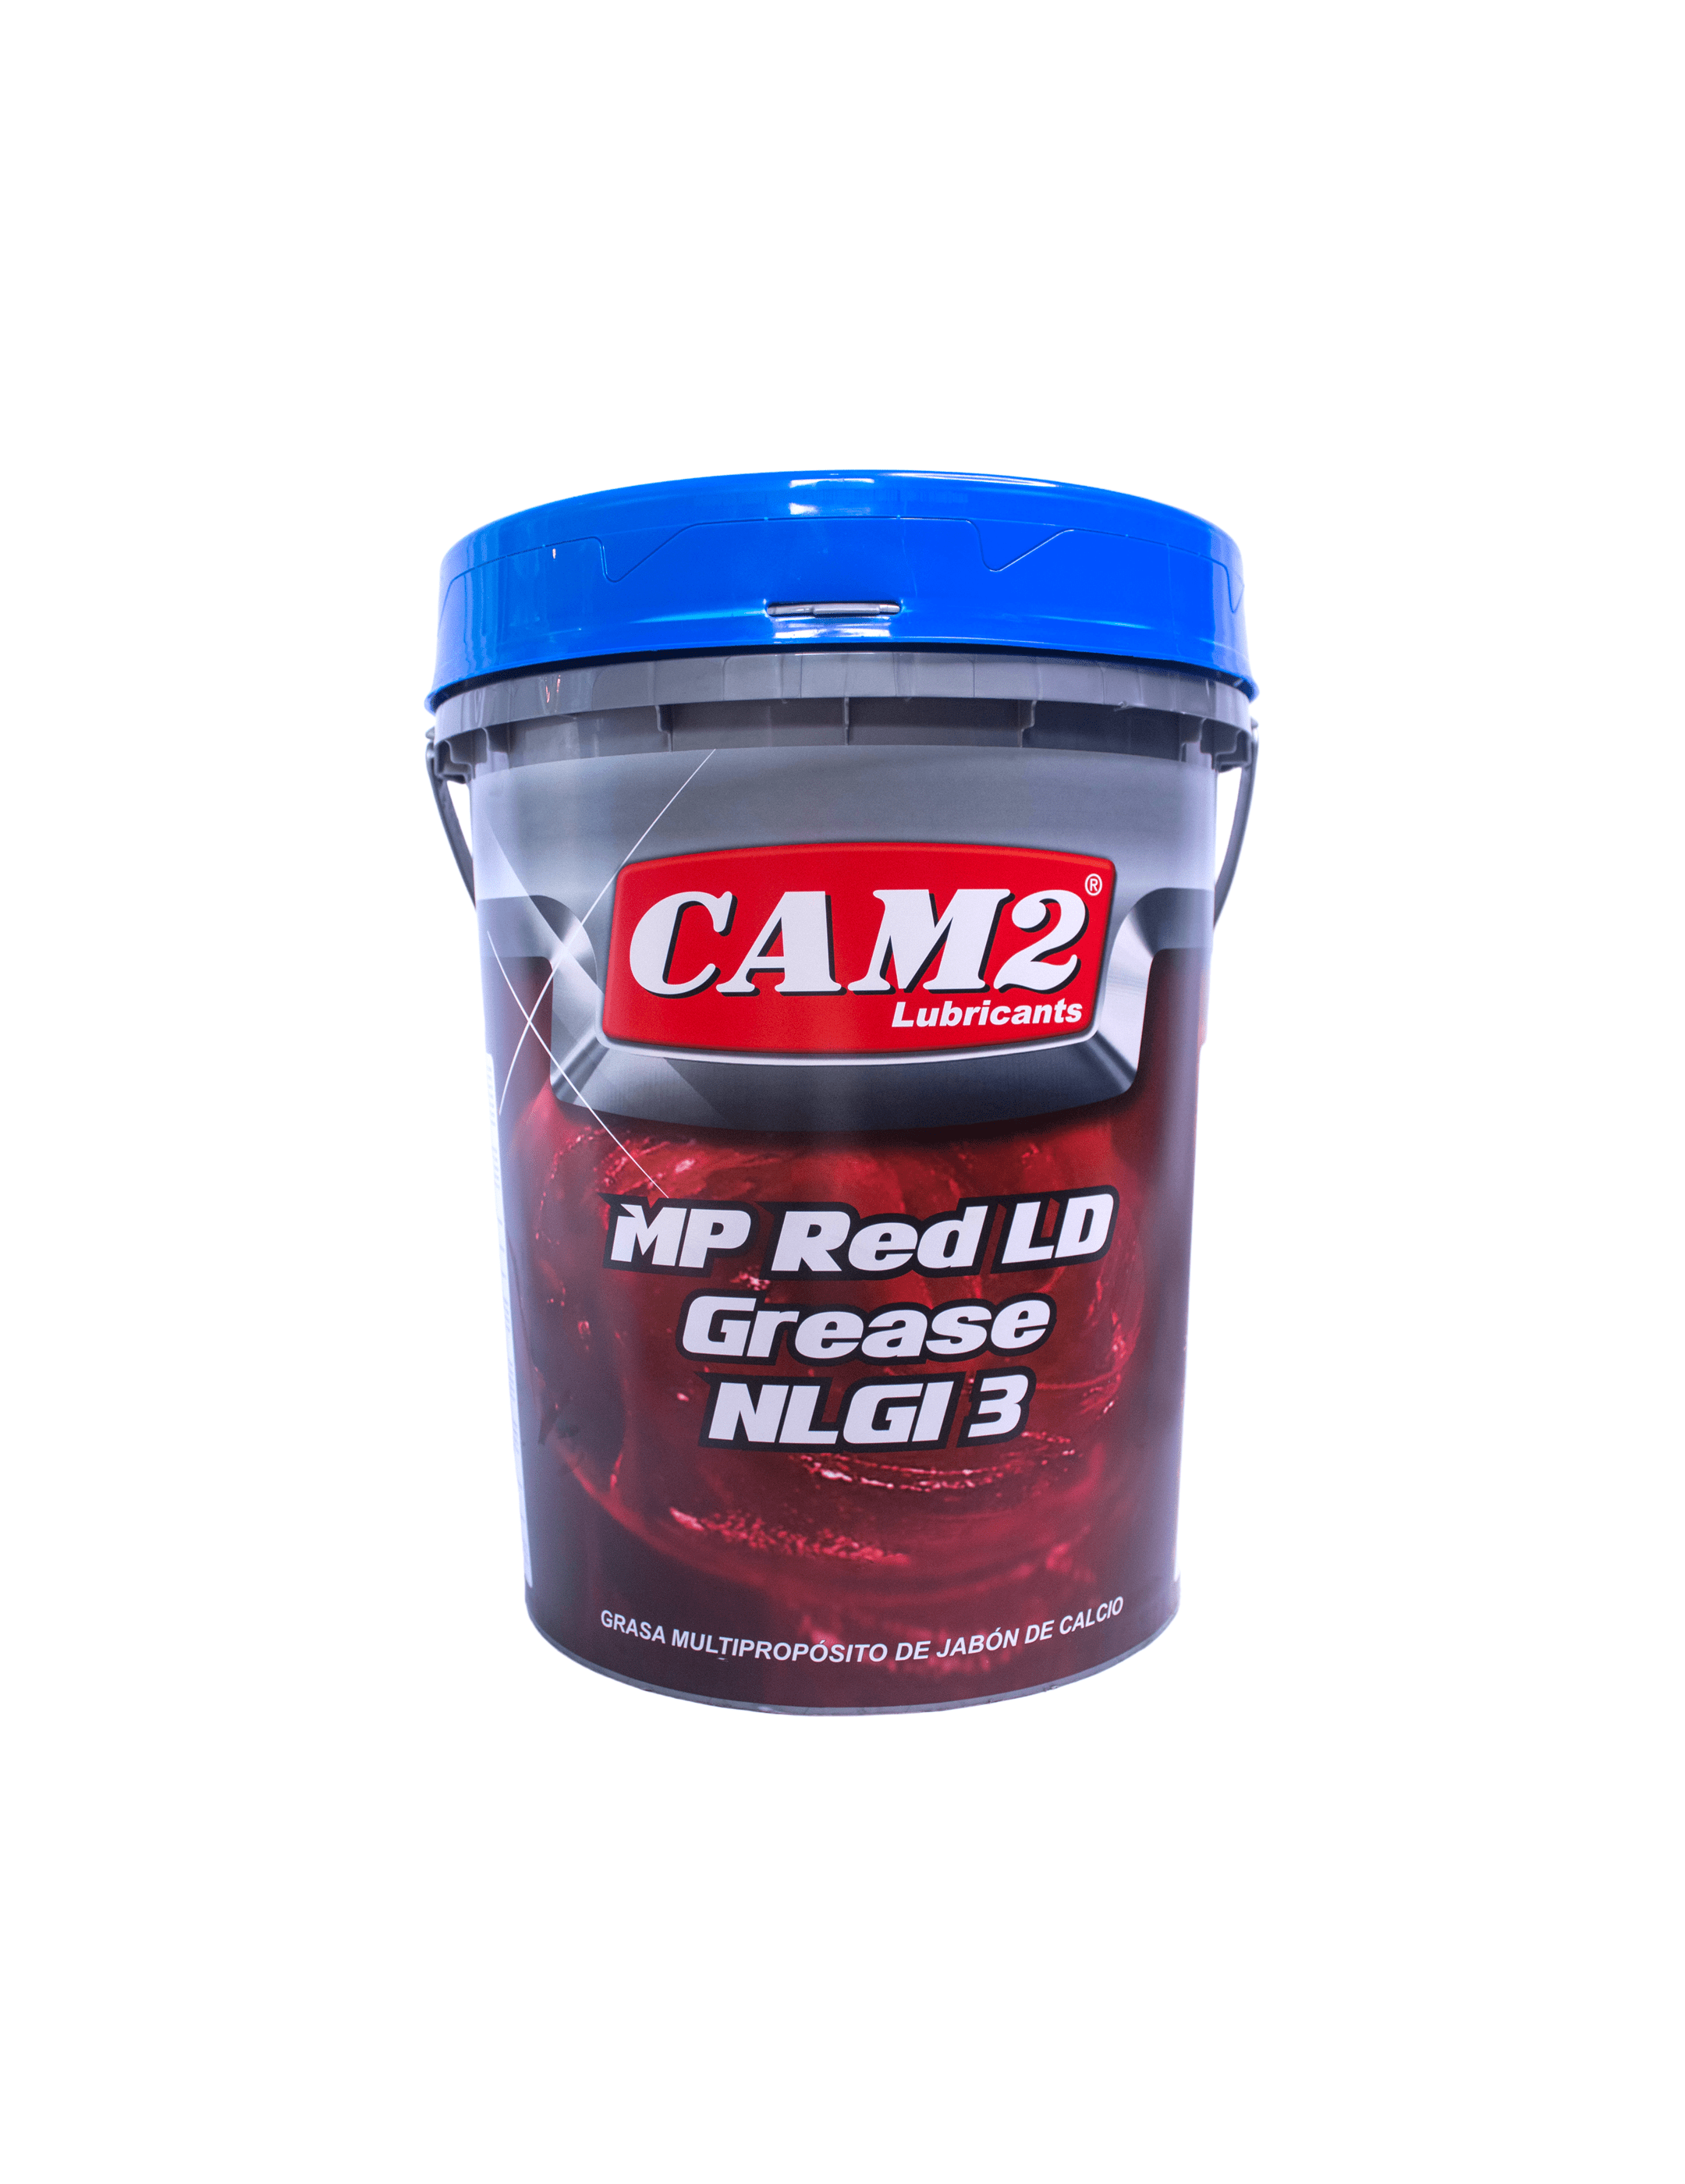 CAM2 MP RED LD GREASE NGLI3 35LBS